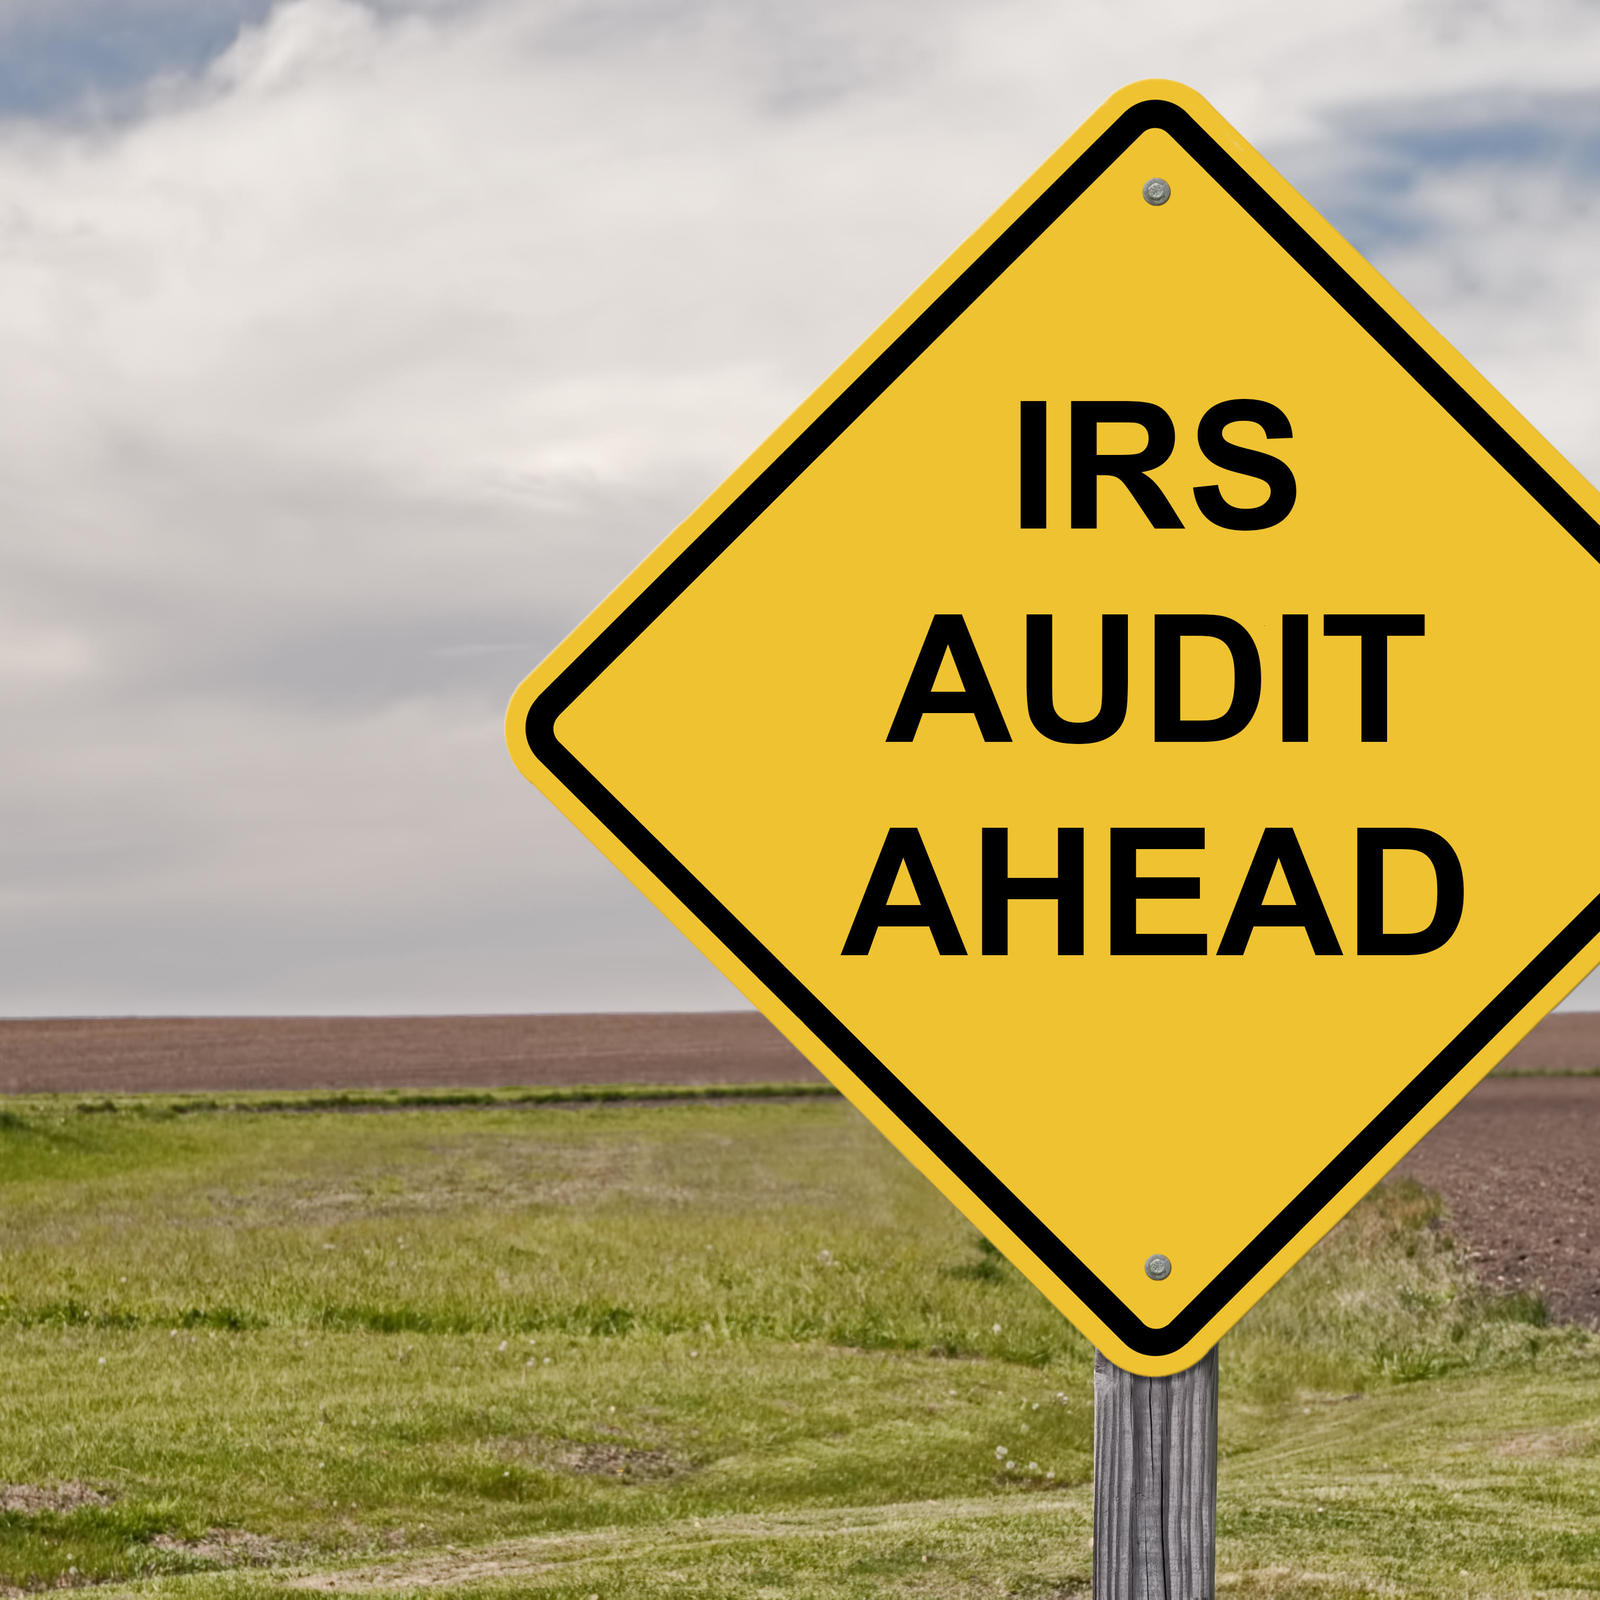 irs says number of audits about to surge. here's who it is targeting.